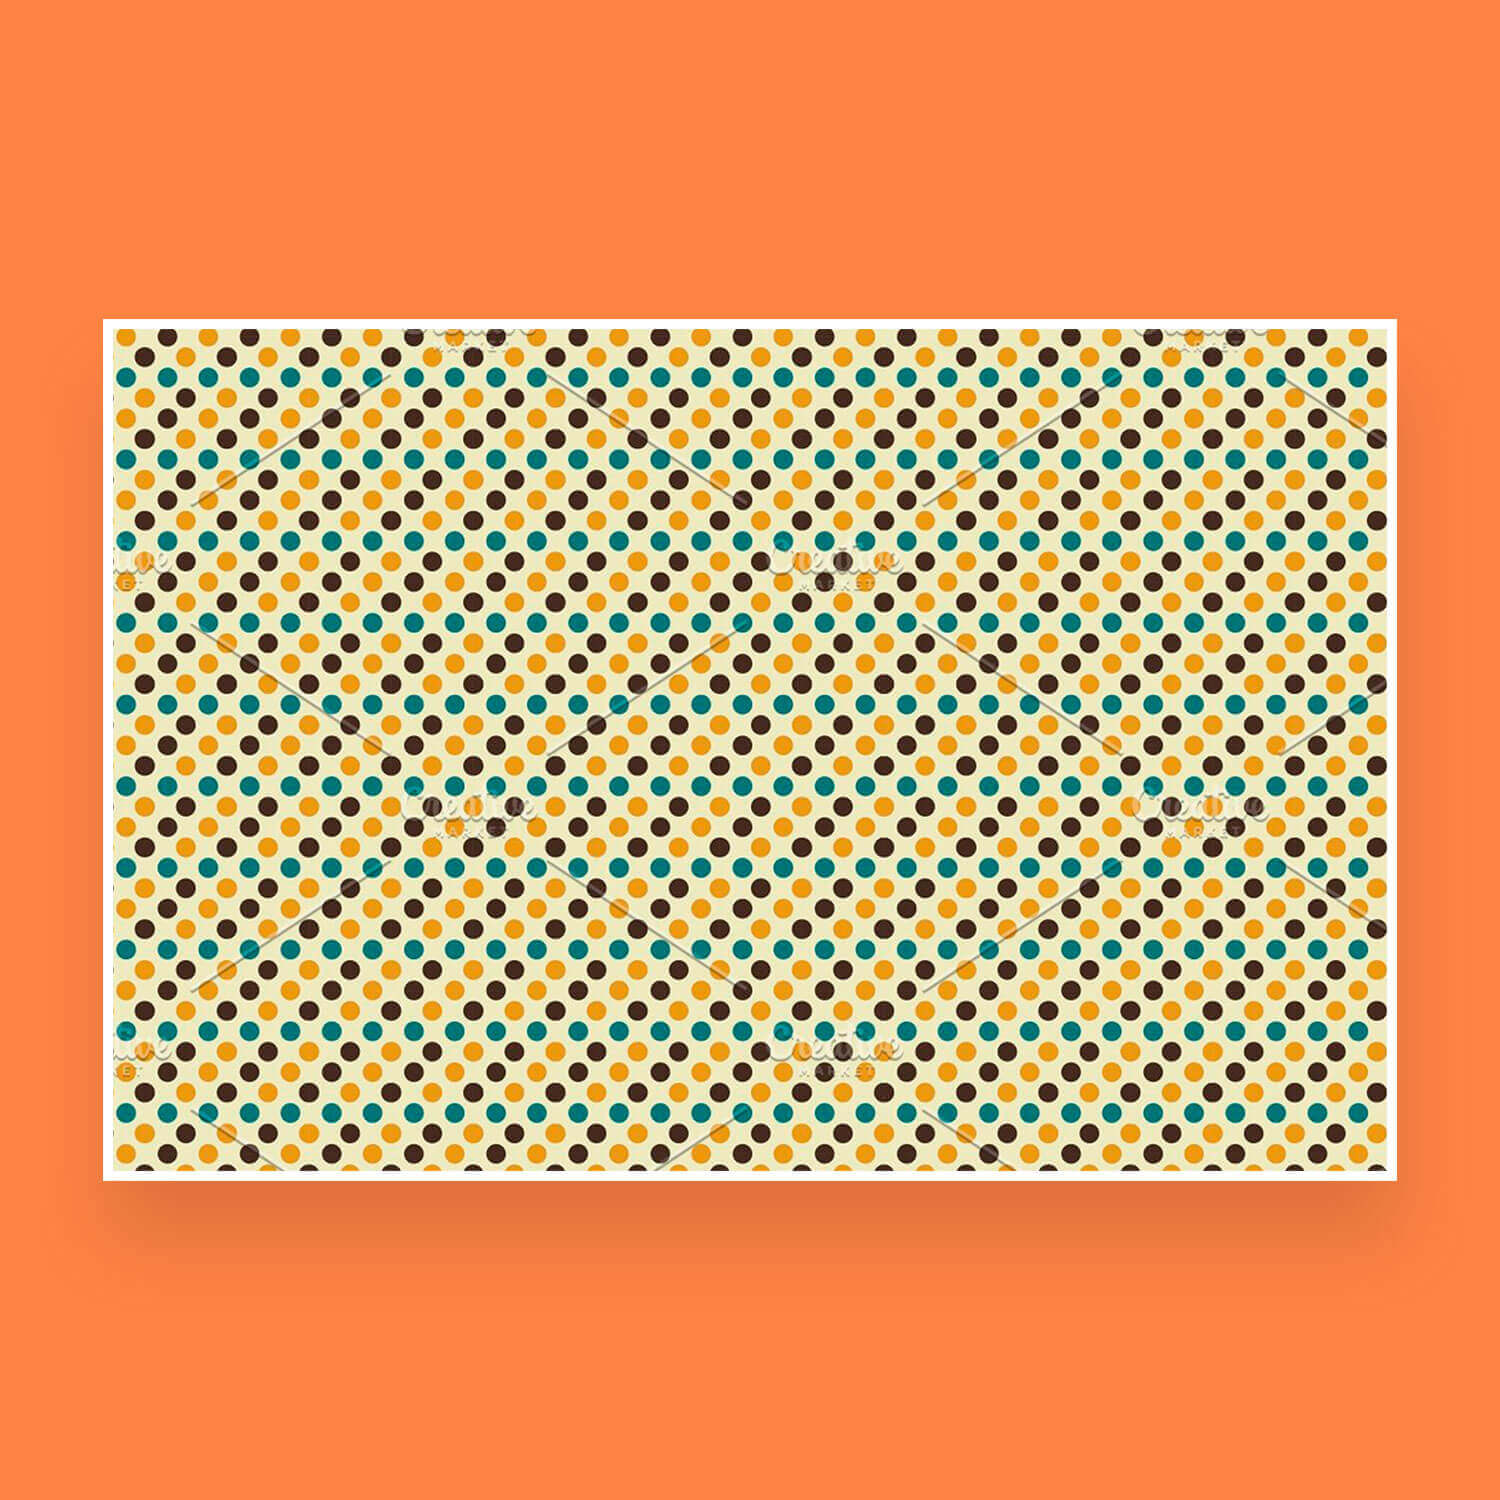 Image with seamless retro pattern circles of different colors.